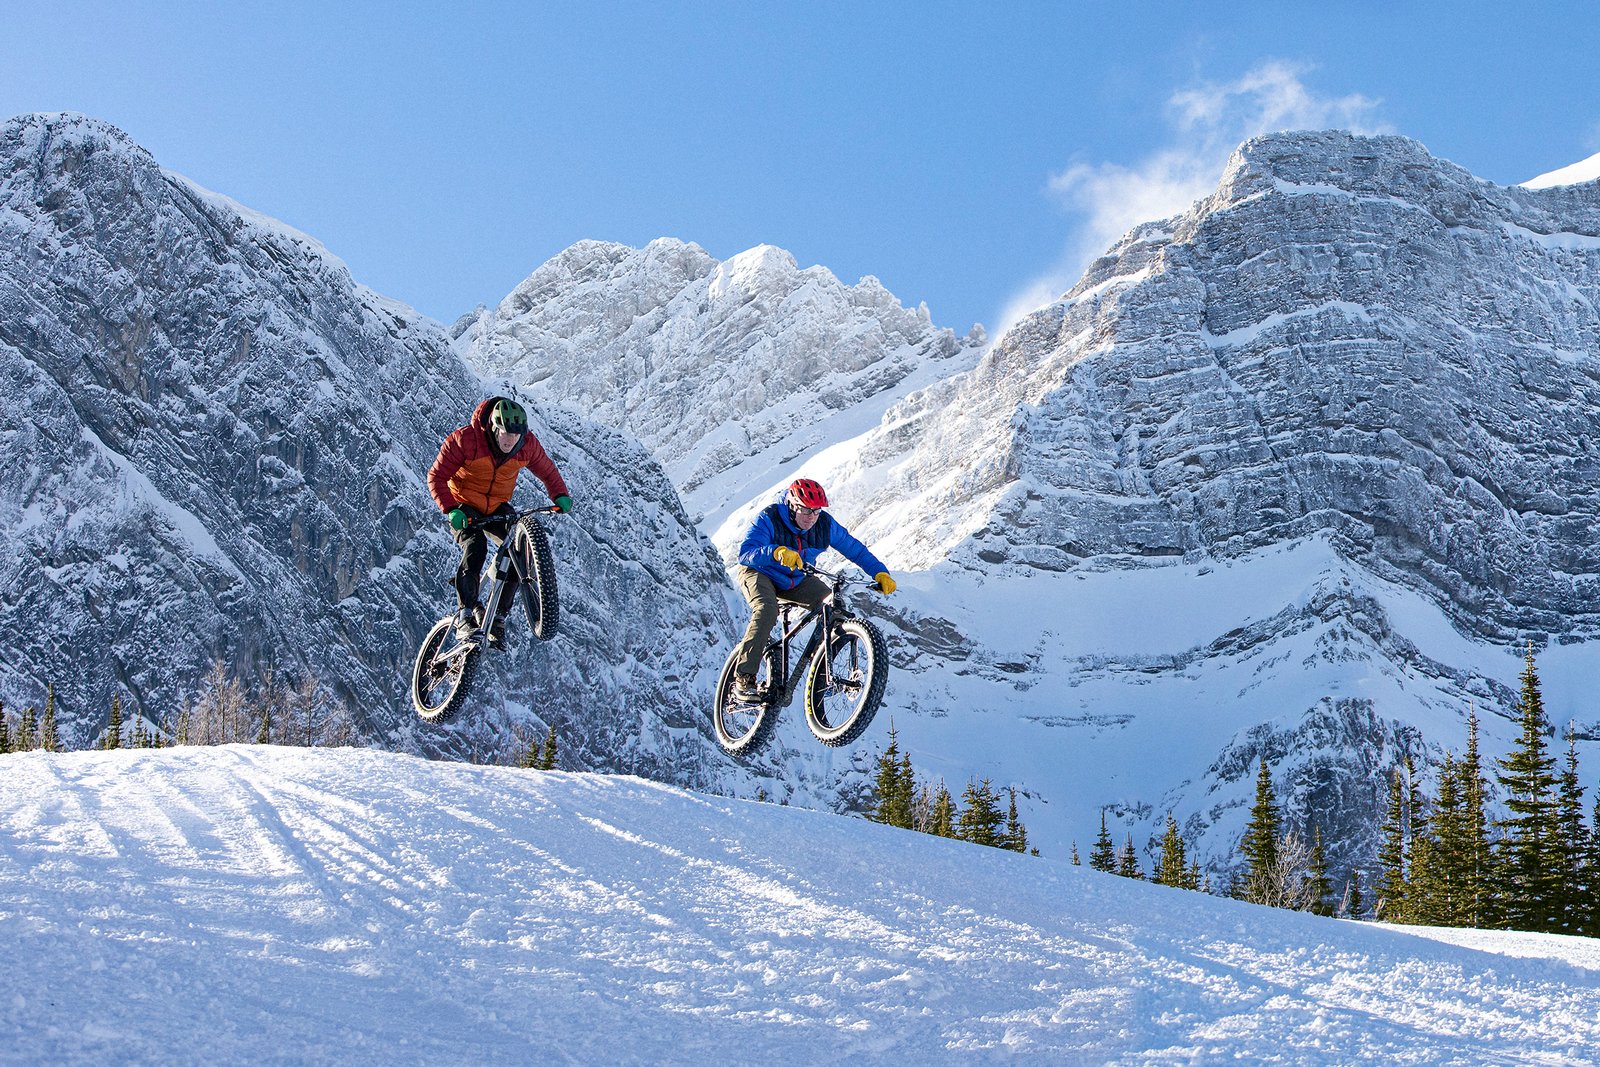 Two people fatbiking and getting air, on a brilliant winter's day, mountains in the background in Kananaskis Country.